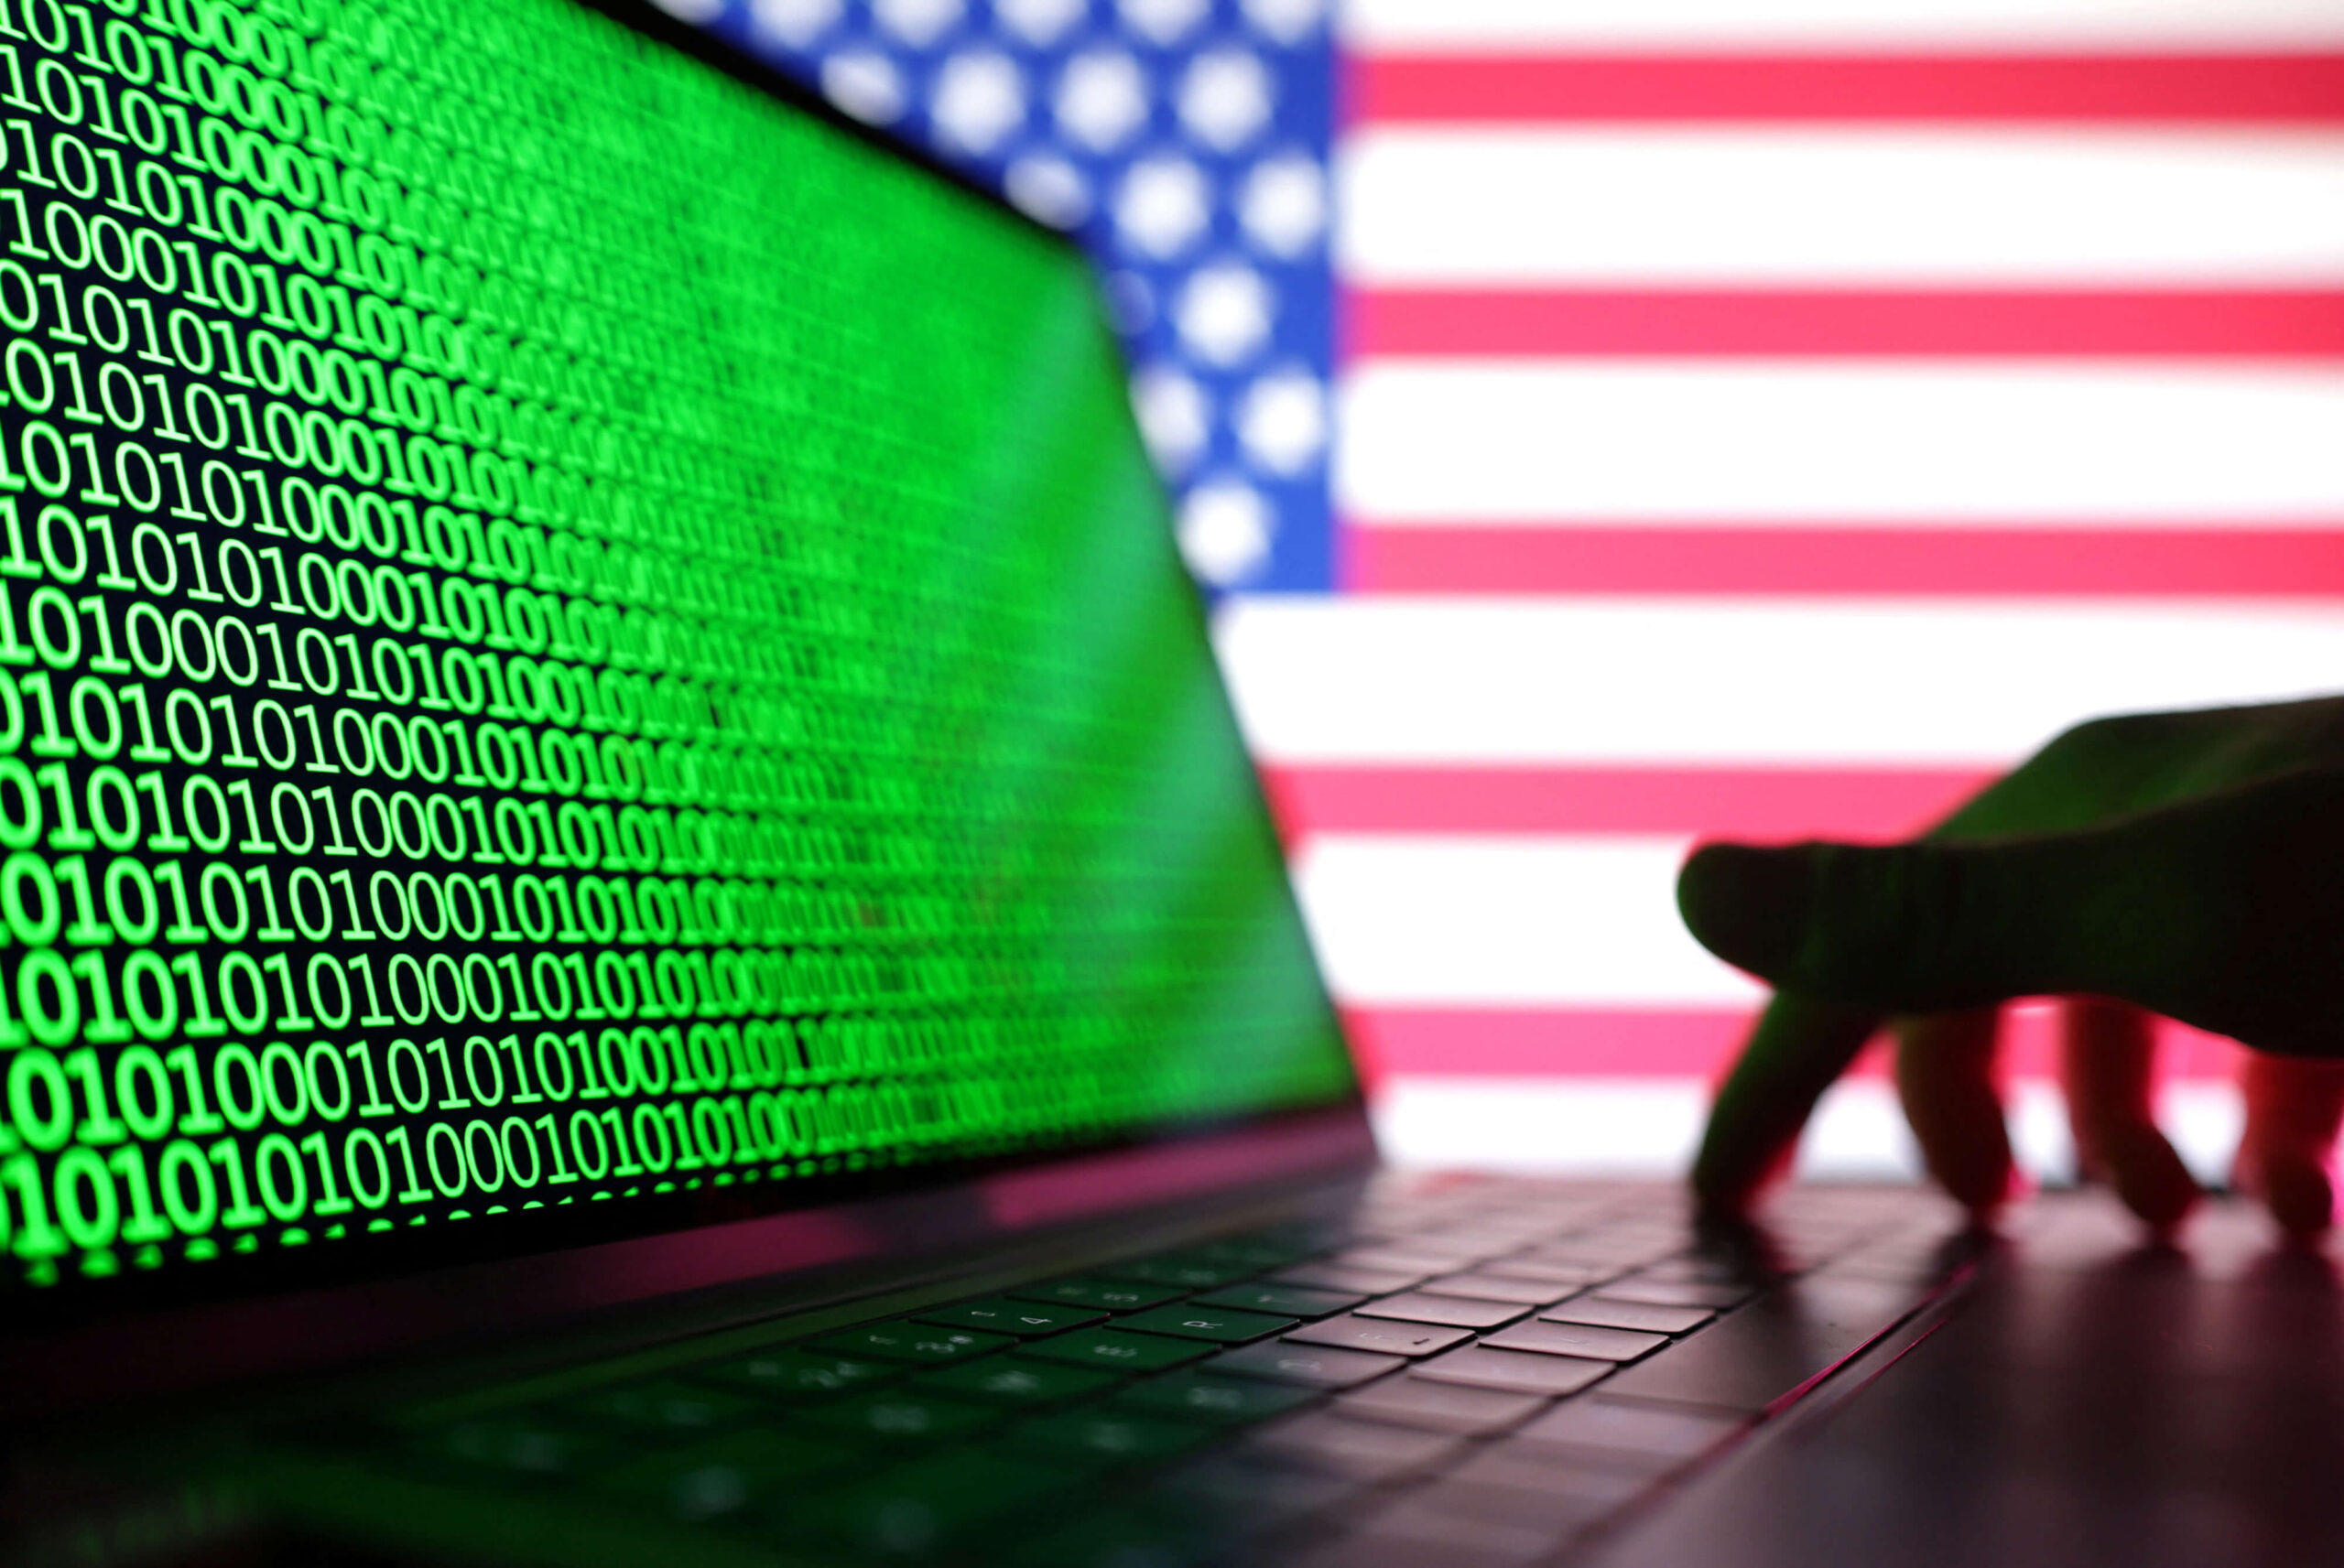 New Cybersecurity Bill: Strengthening US Defenses Amid Escalating Threats